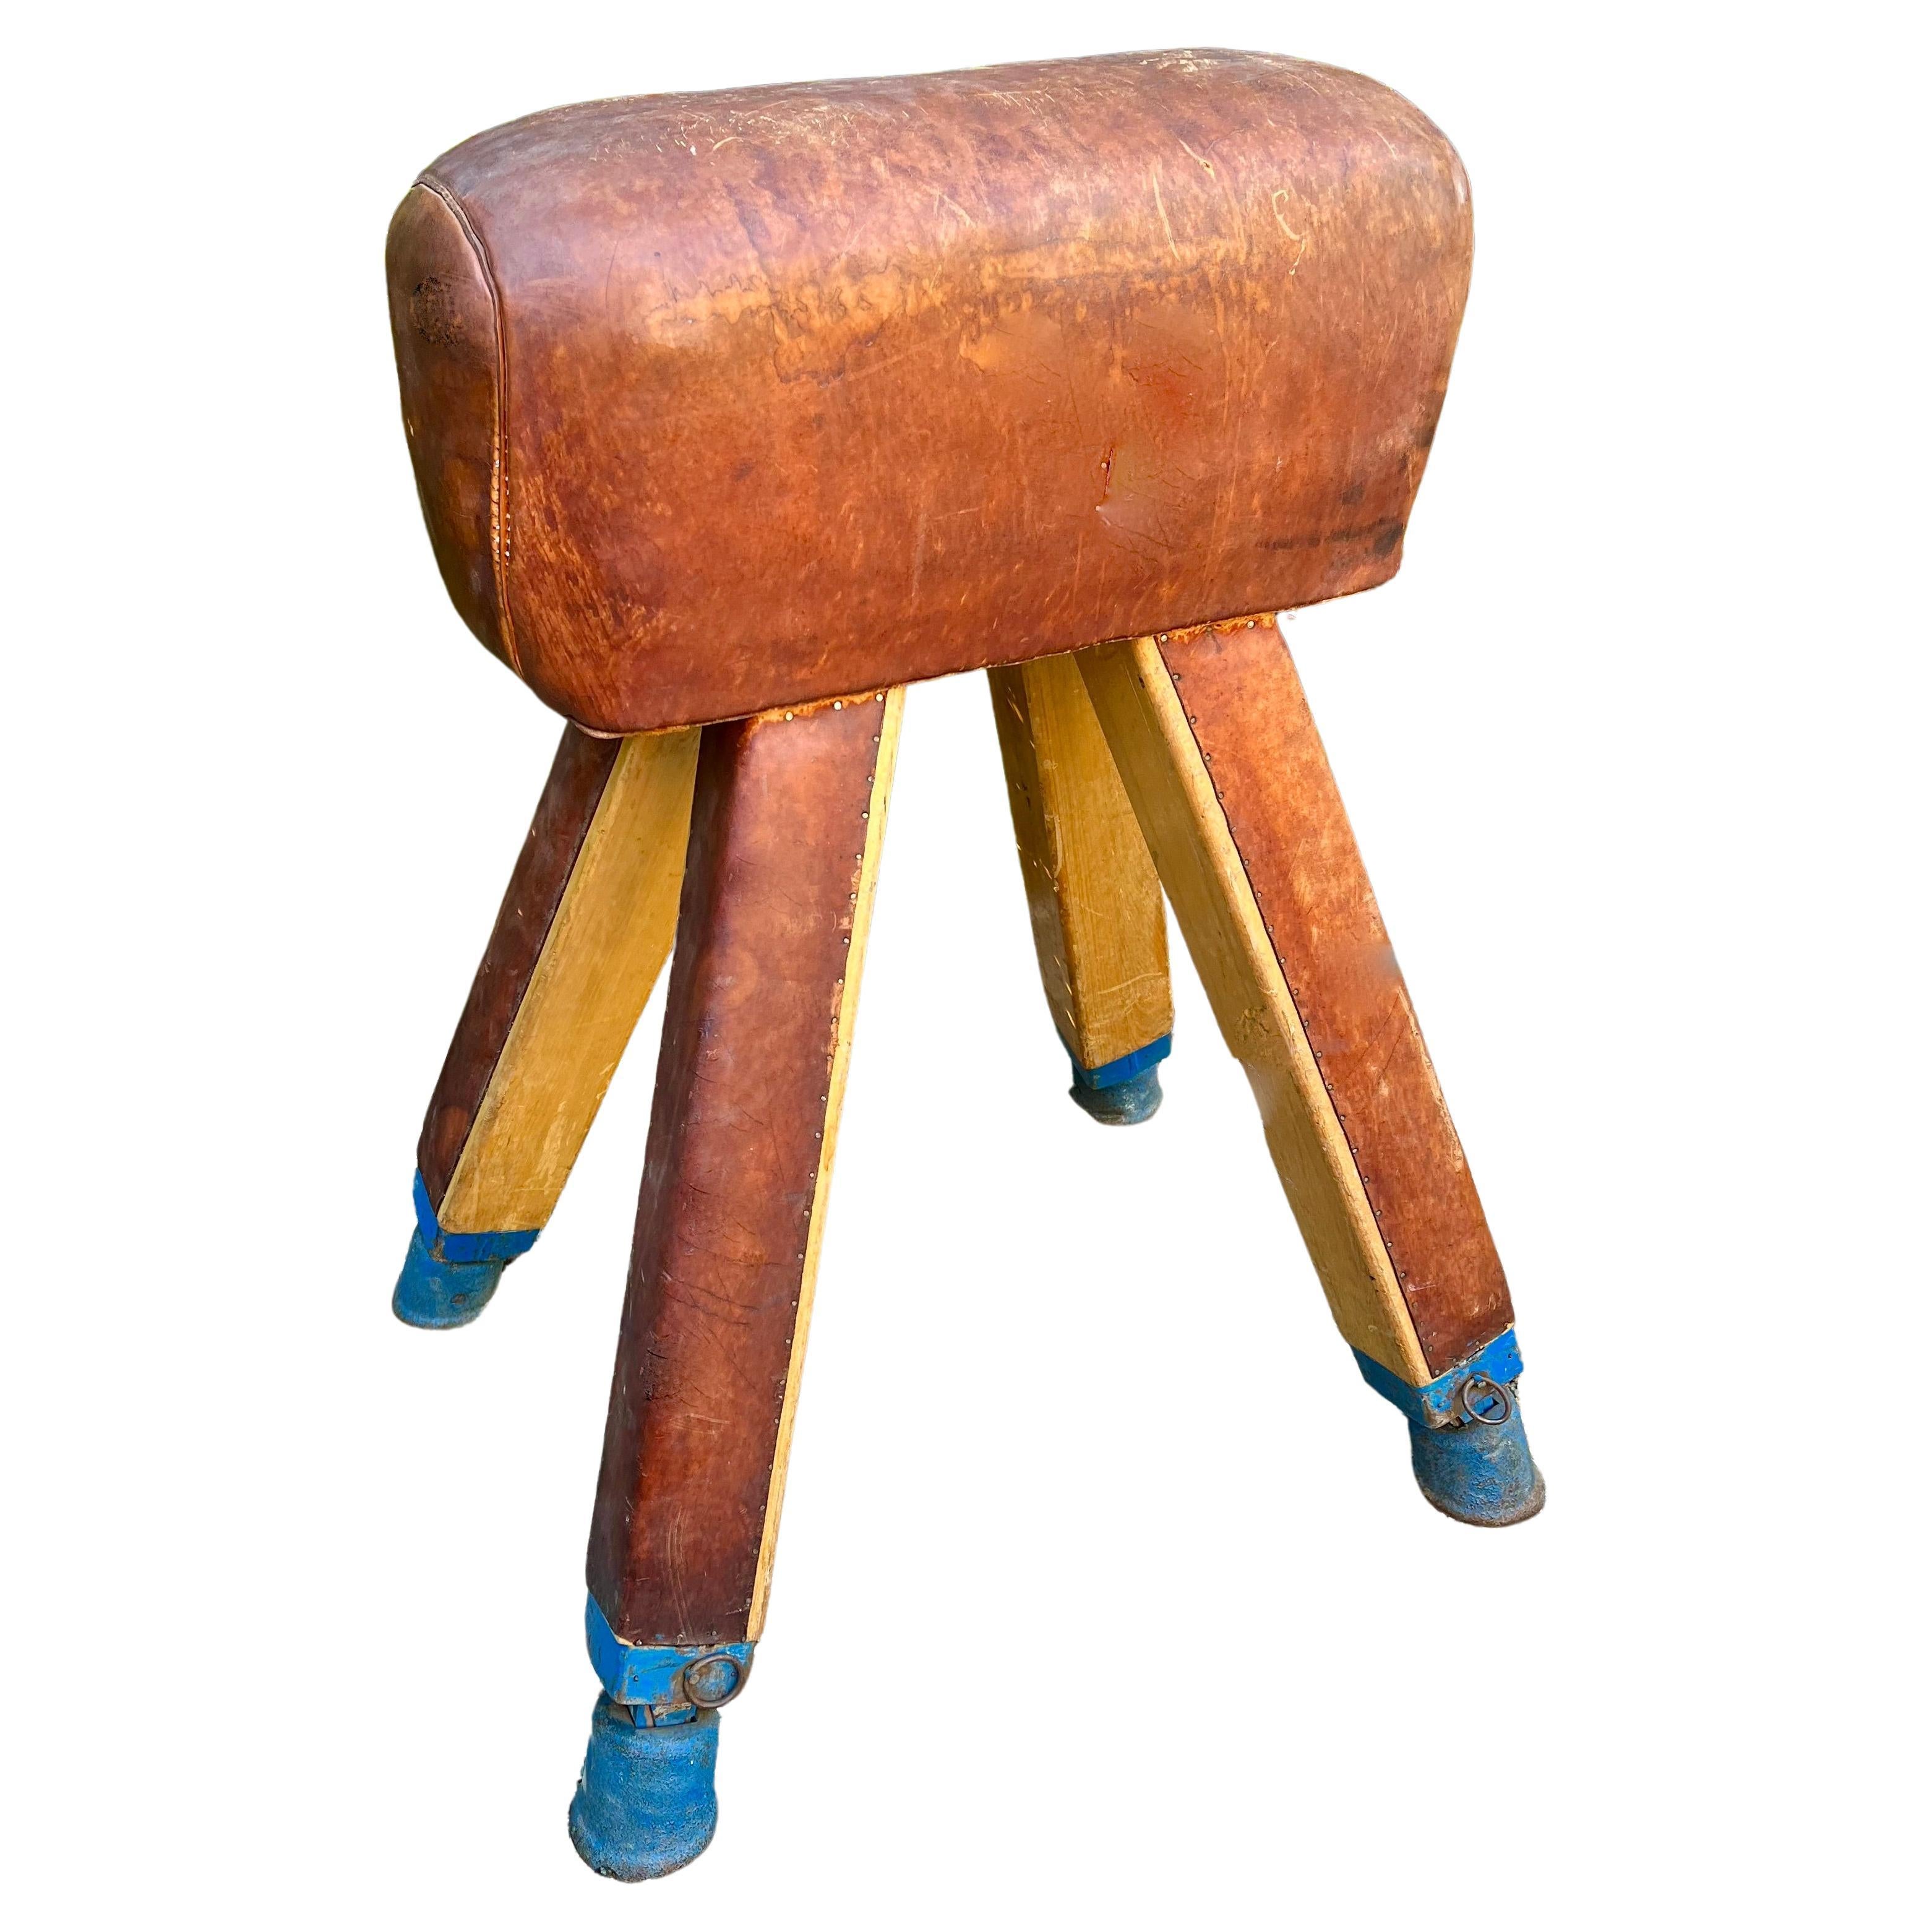 A Pommel Horse Beautifully Patinated in leather. The wooden legs and Blue metal Sabots with rings give this French piece a wonderfully patinated finish from years of use. The vintage quality suffers no offensive tears, cracks or physical